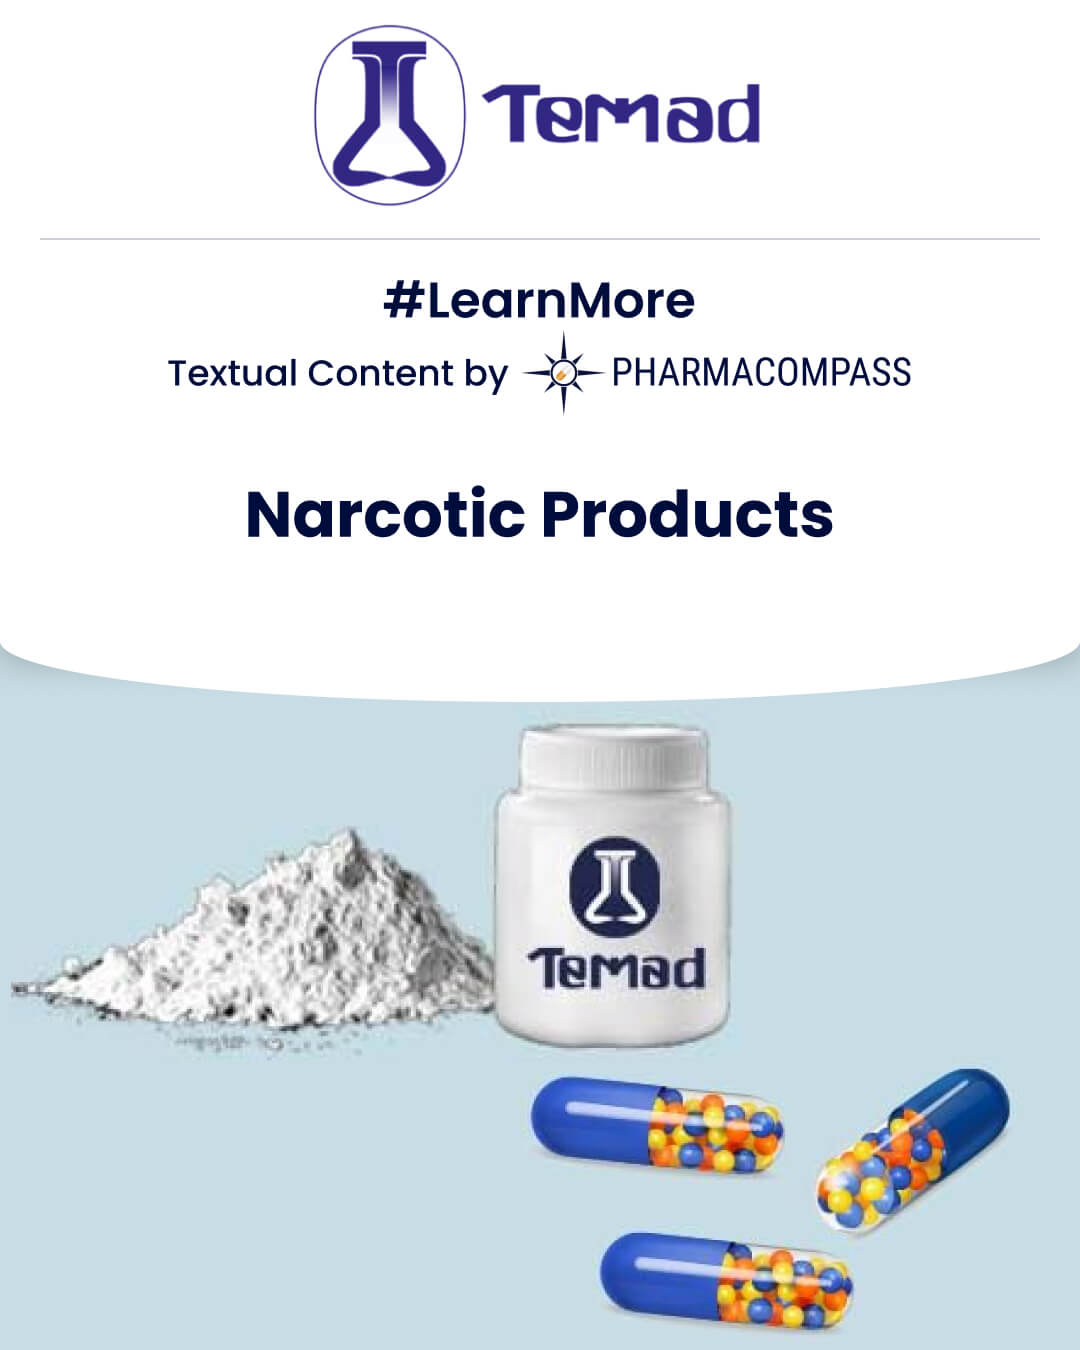 View Temad`s portfolio of Narcotic & Non-Narcotic APIs, Intermediates & Finished Products & explore Temad`s manufacturing activities on PharmaCompass.